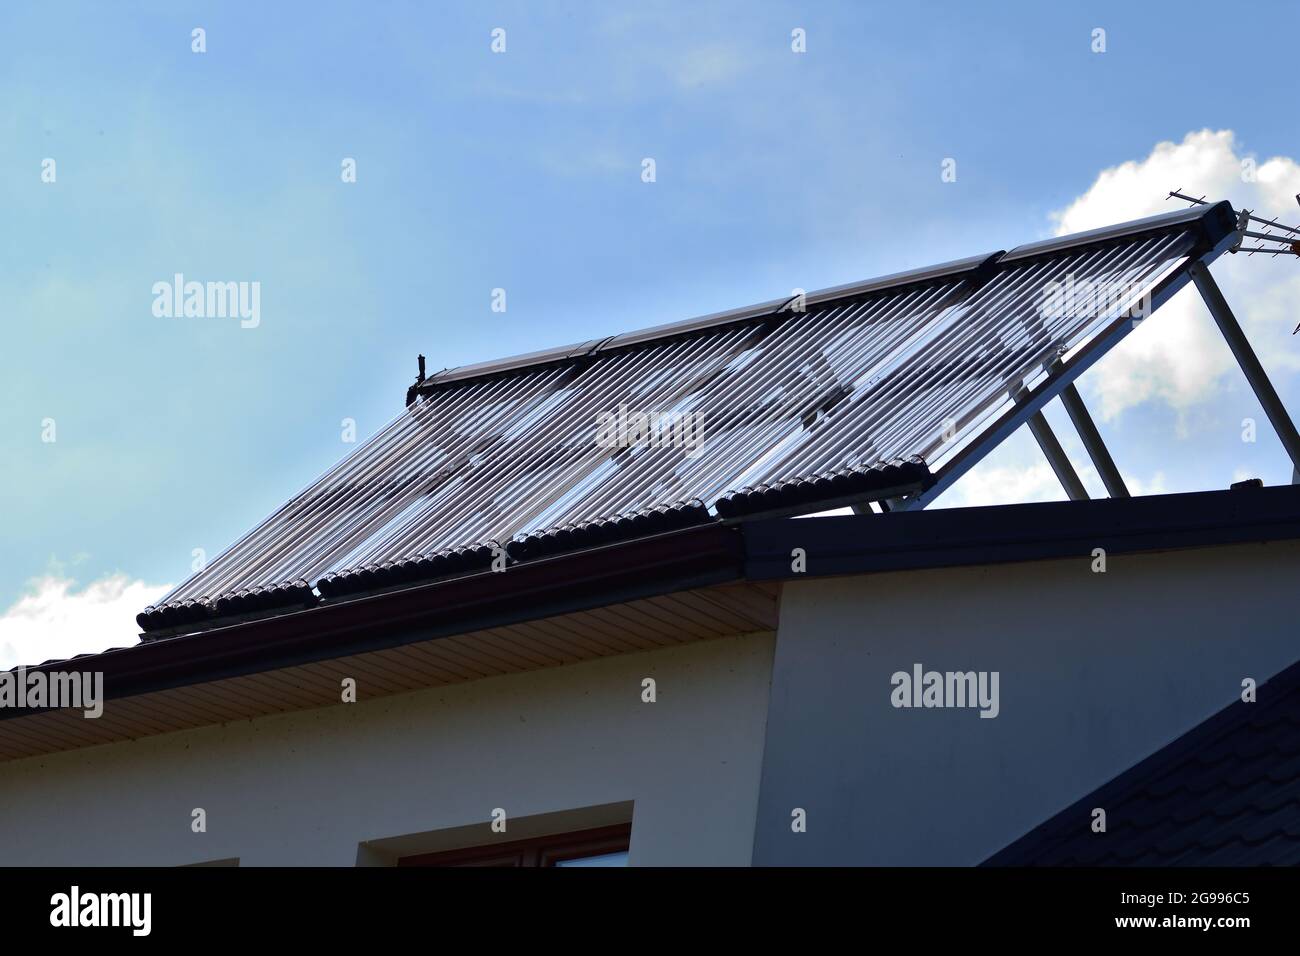 Solar panels for heating domestic hot water on the roof of the house. Summer Stock Photo